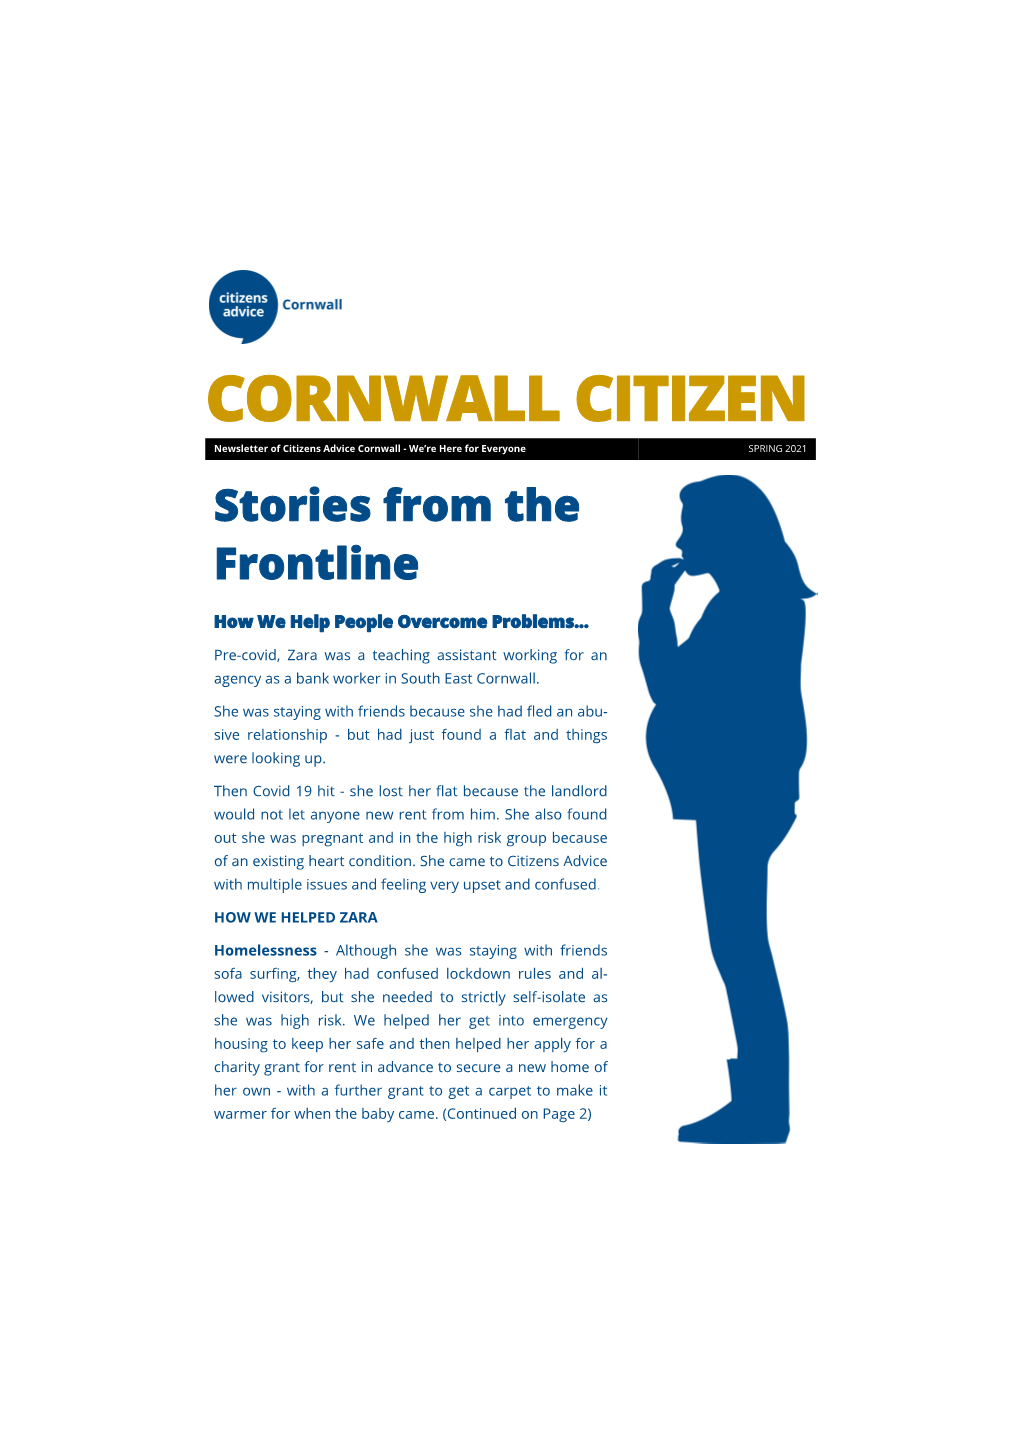 CORNWALL CITIZEN Newsletter of Citizens Advice Cornwall - We’Re Here for Everyone SPRING 2021 Stories from the Frontline